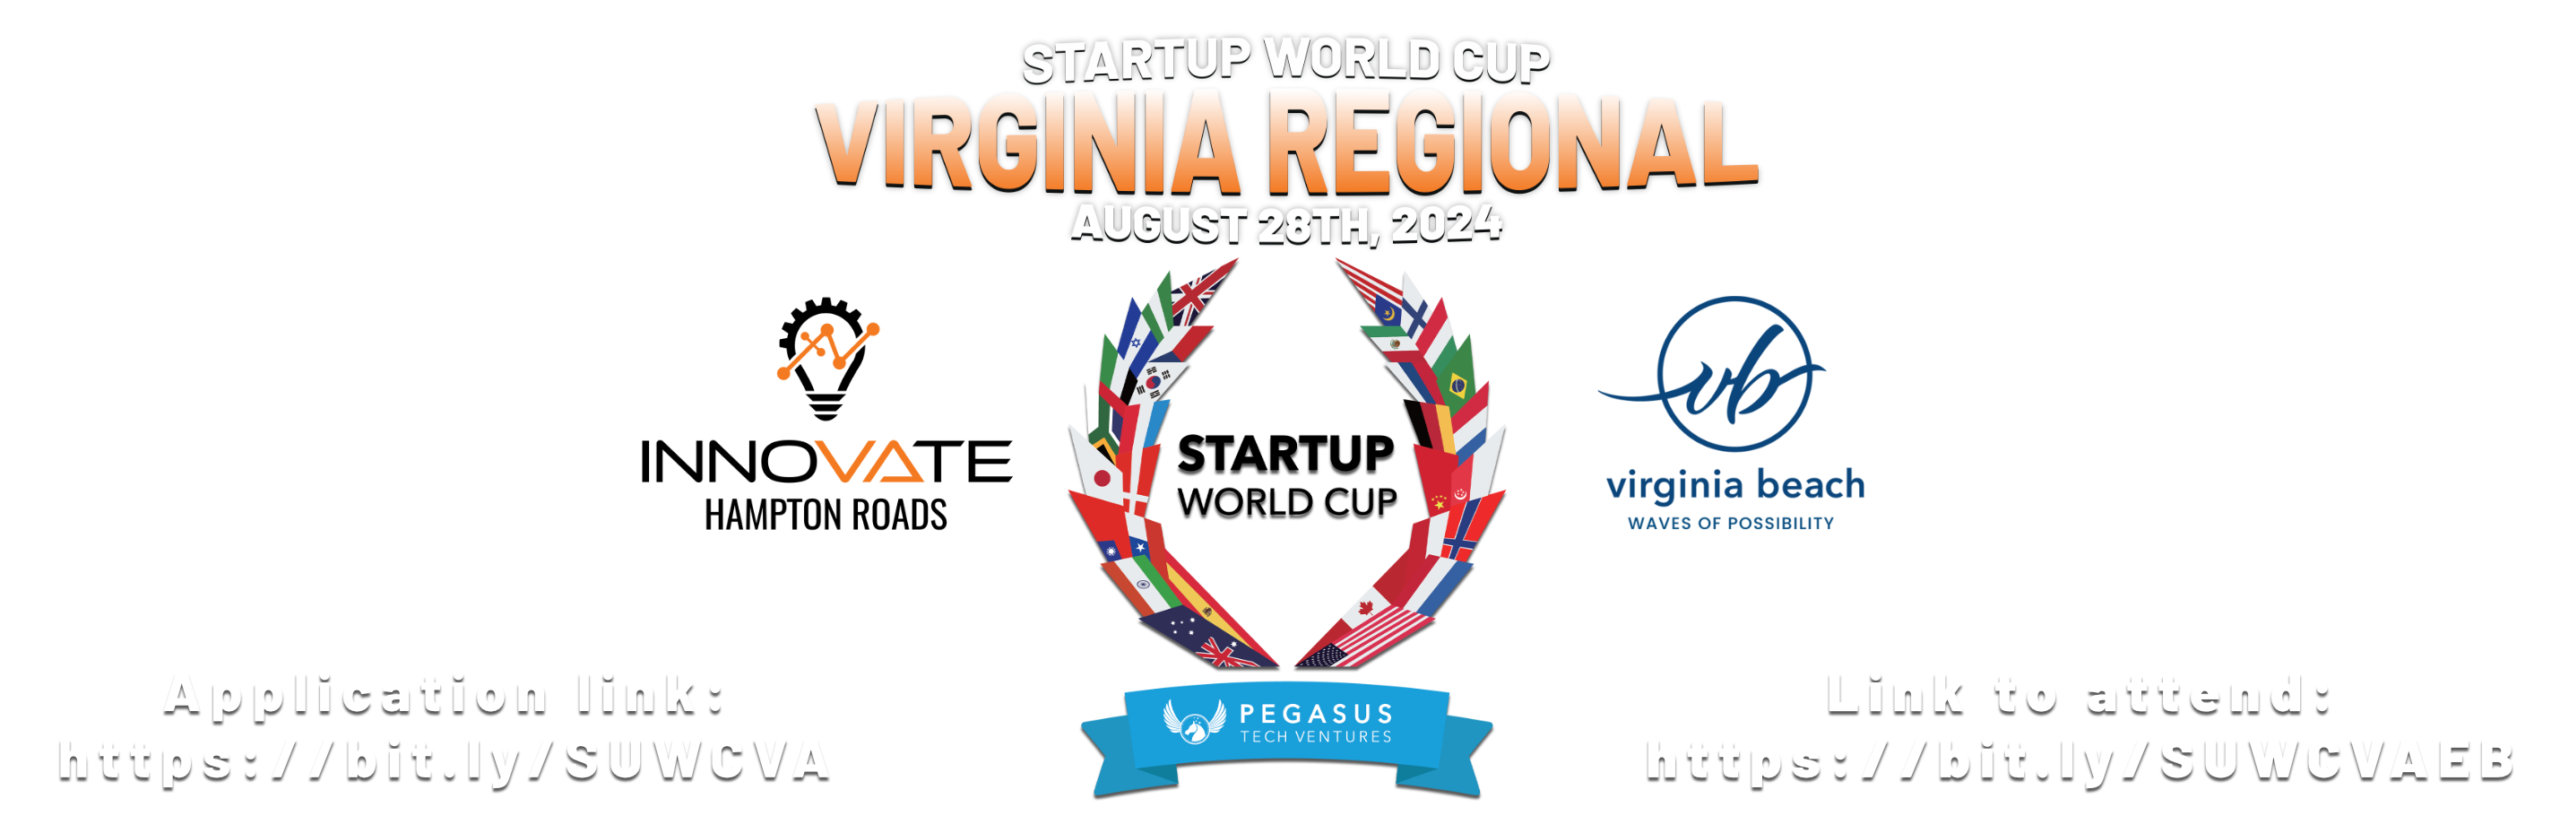 Startup World Cup Virginia Regional | August 28th, 2024